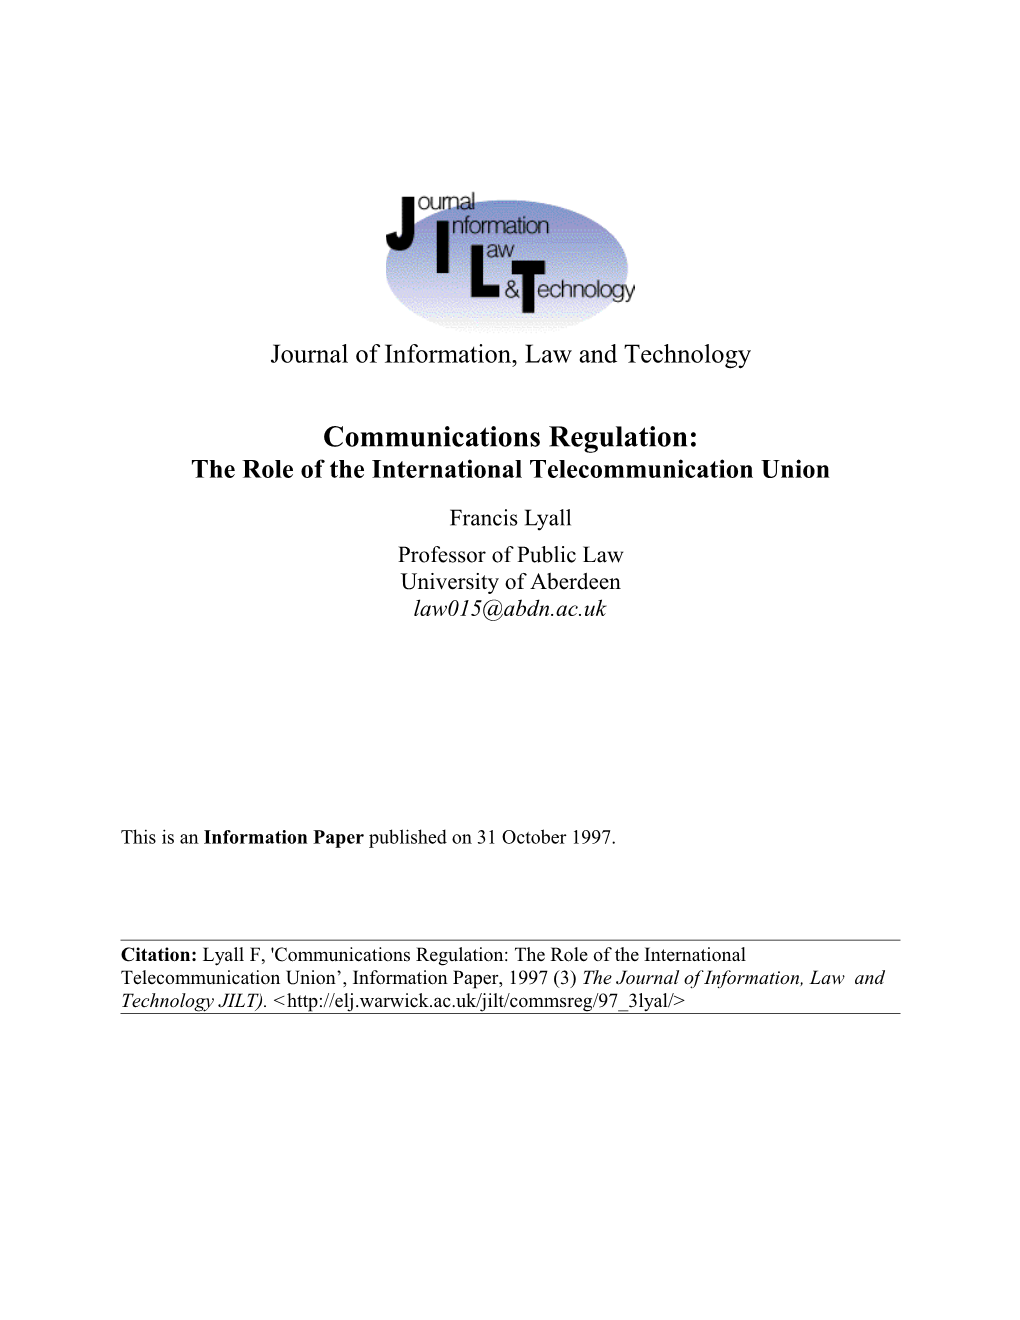 Lyall Fcommunications Regulation: the Role of the ITU